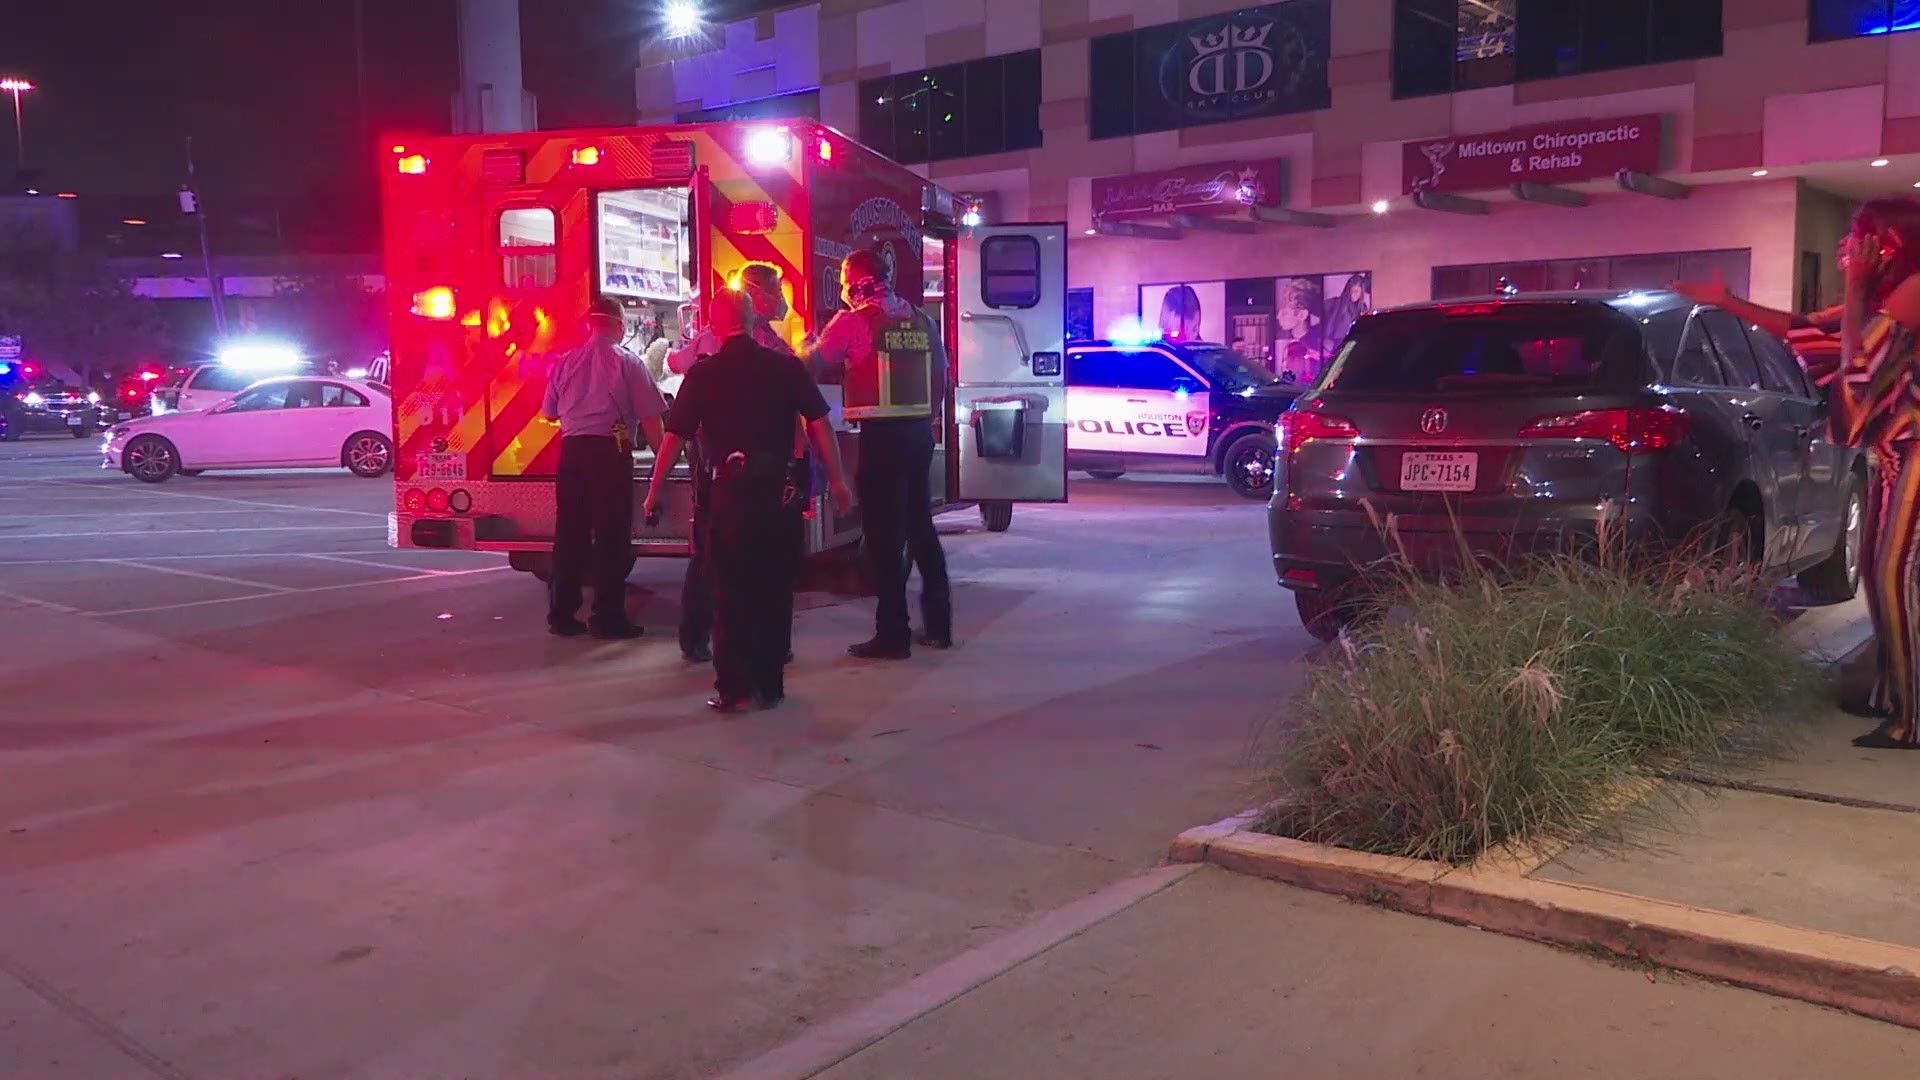 Raw video: 3 dead, 1 injured in shooting at Midtown club, police say |  